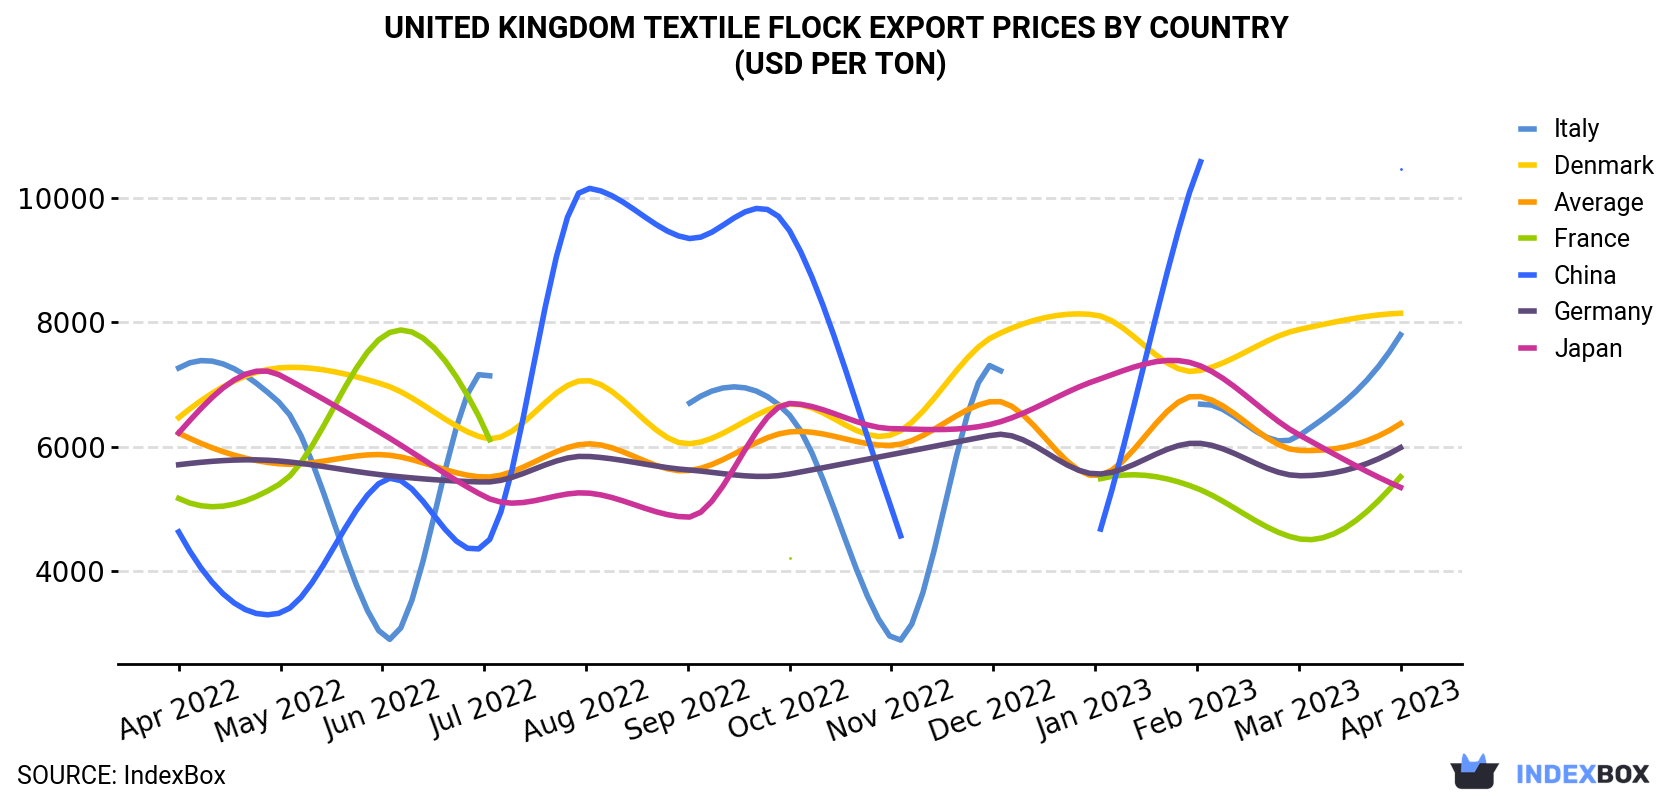 United Kingdom Textile Flock Export Prices By Country (USD Per Ton)